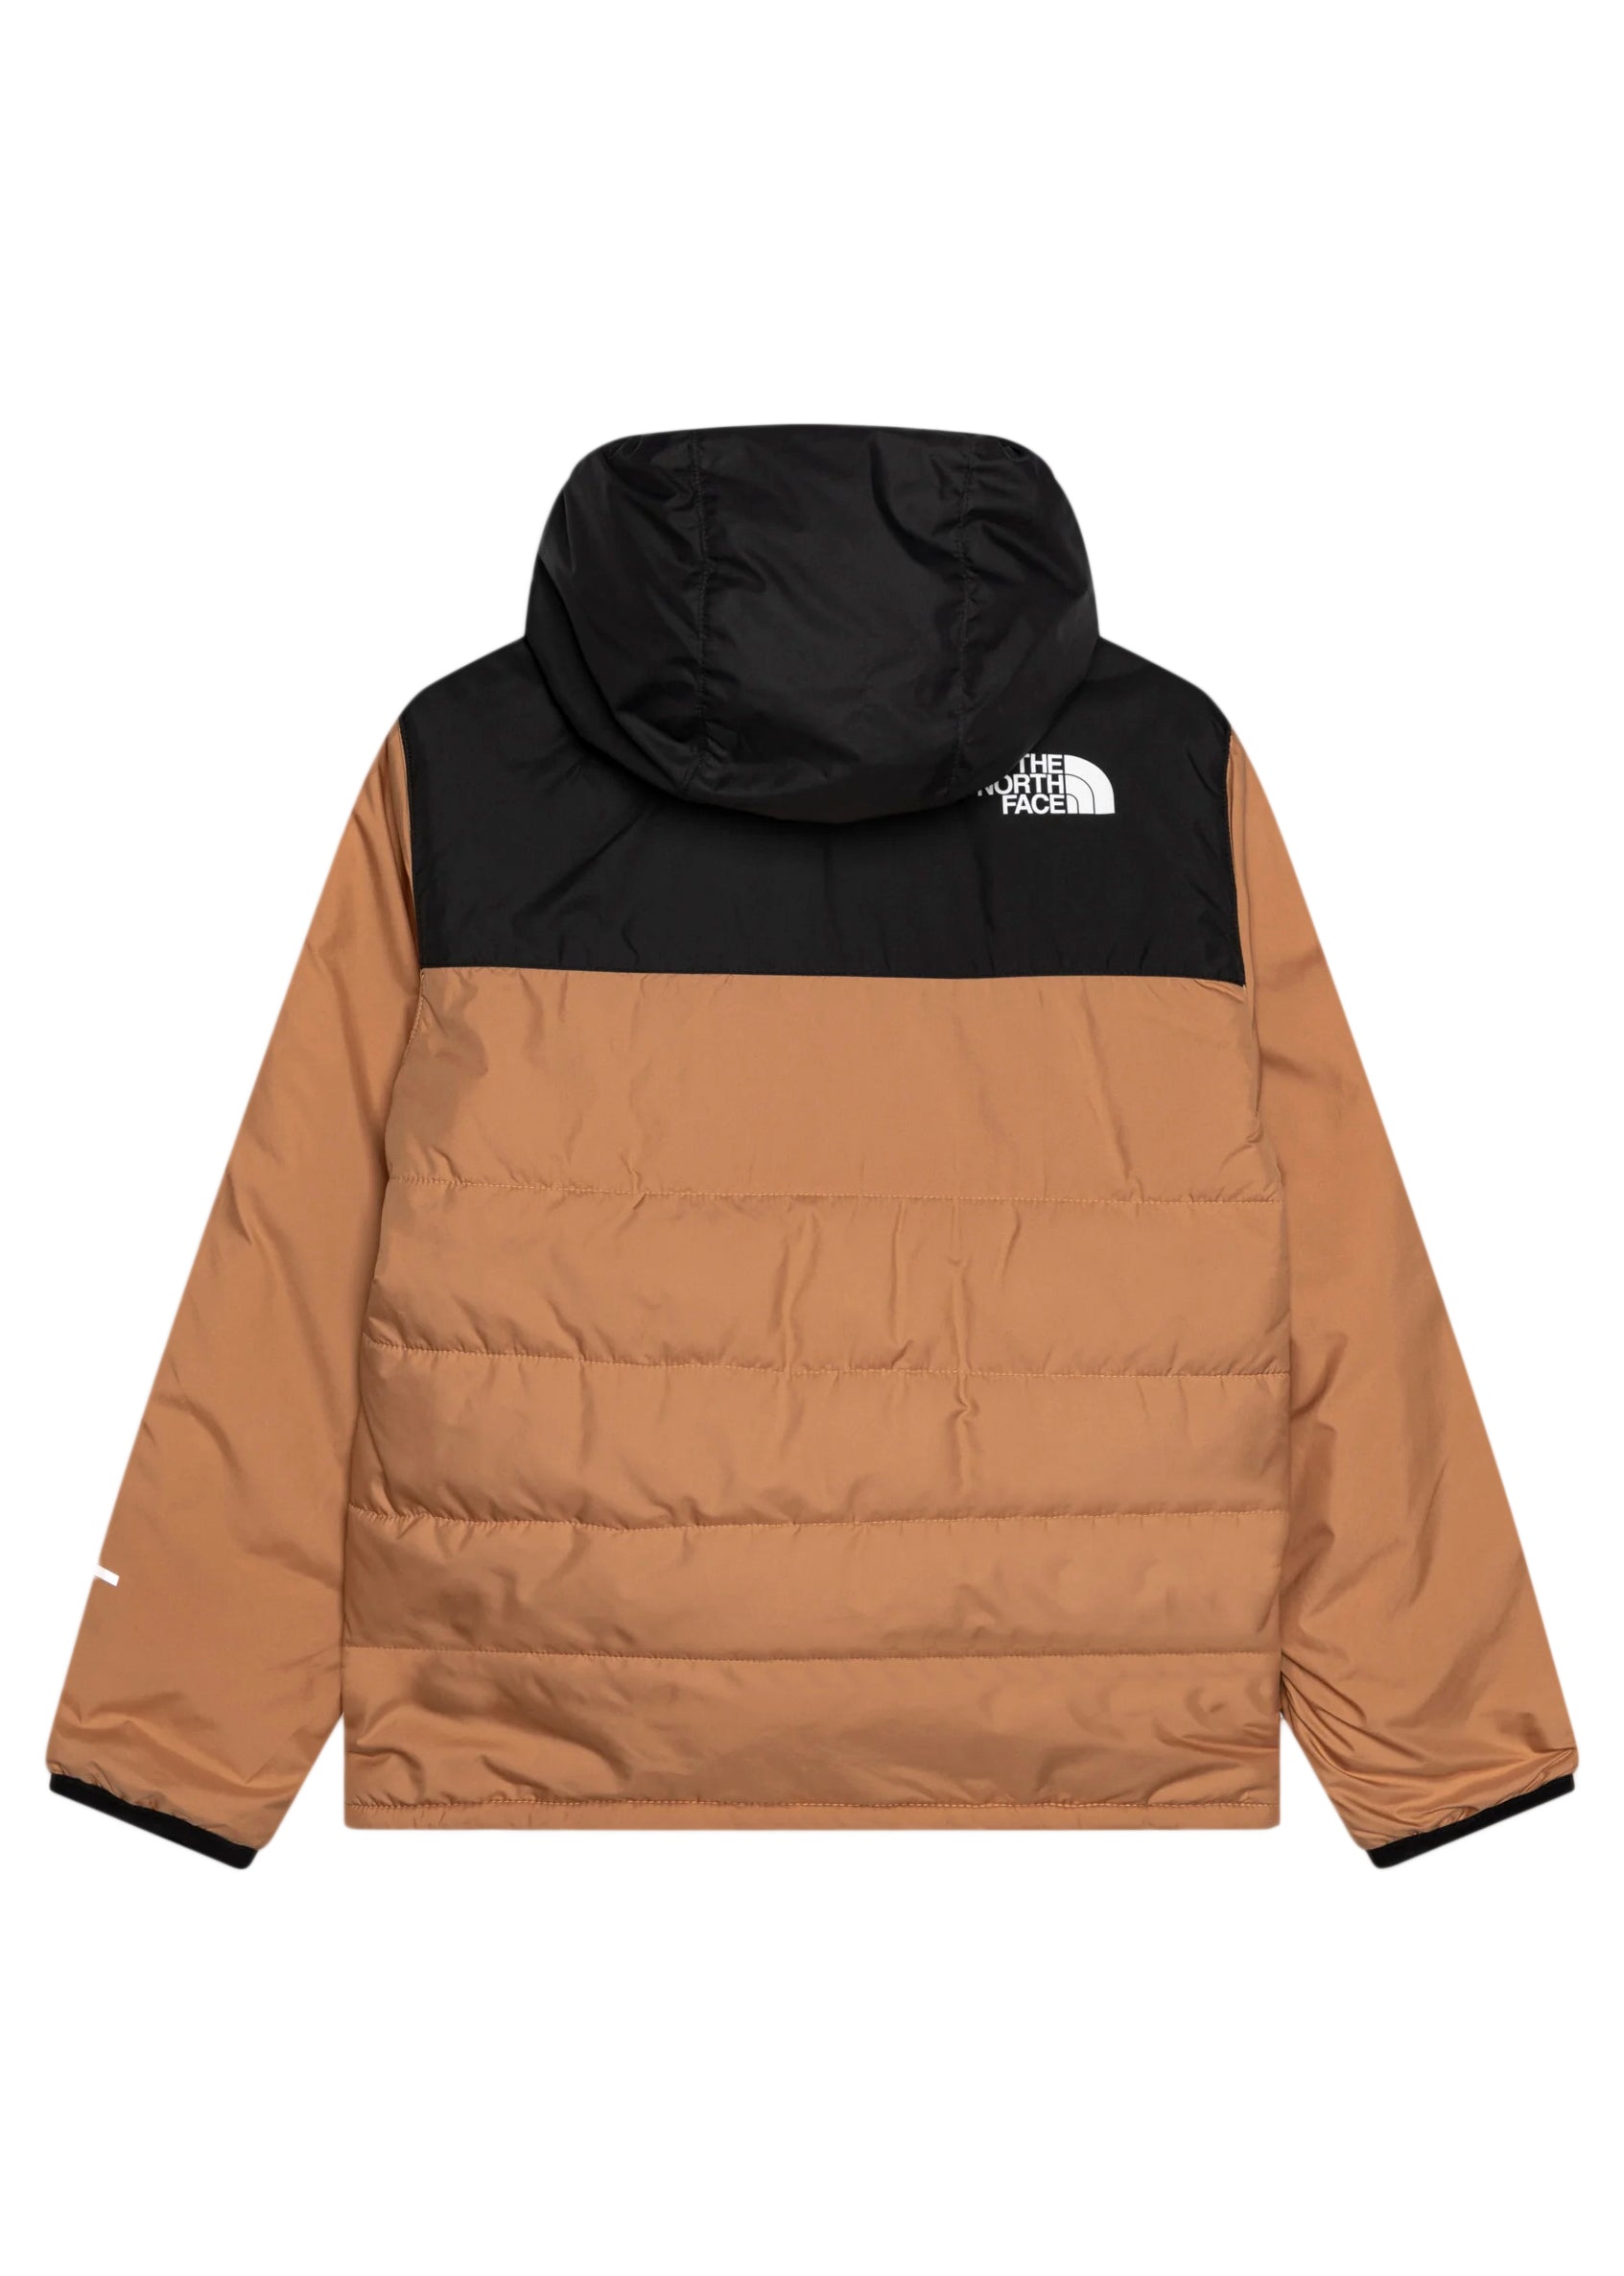 Giacca The North Face Kids Piumino "Never Stop" Color Nocciola - Florence Kids